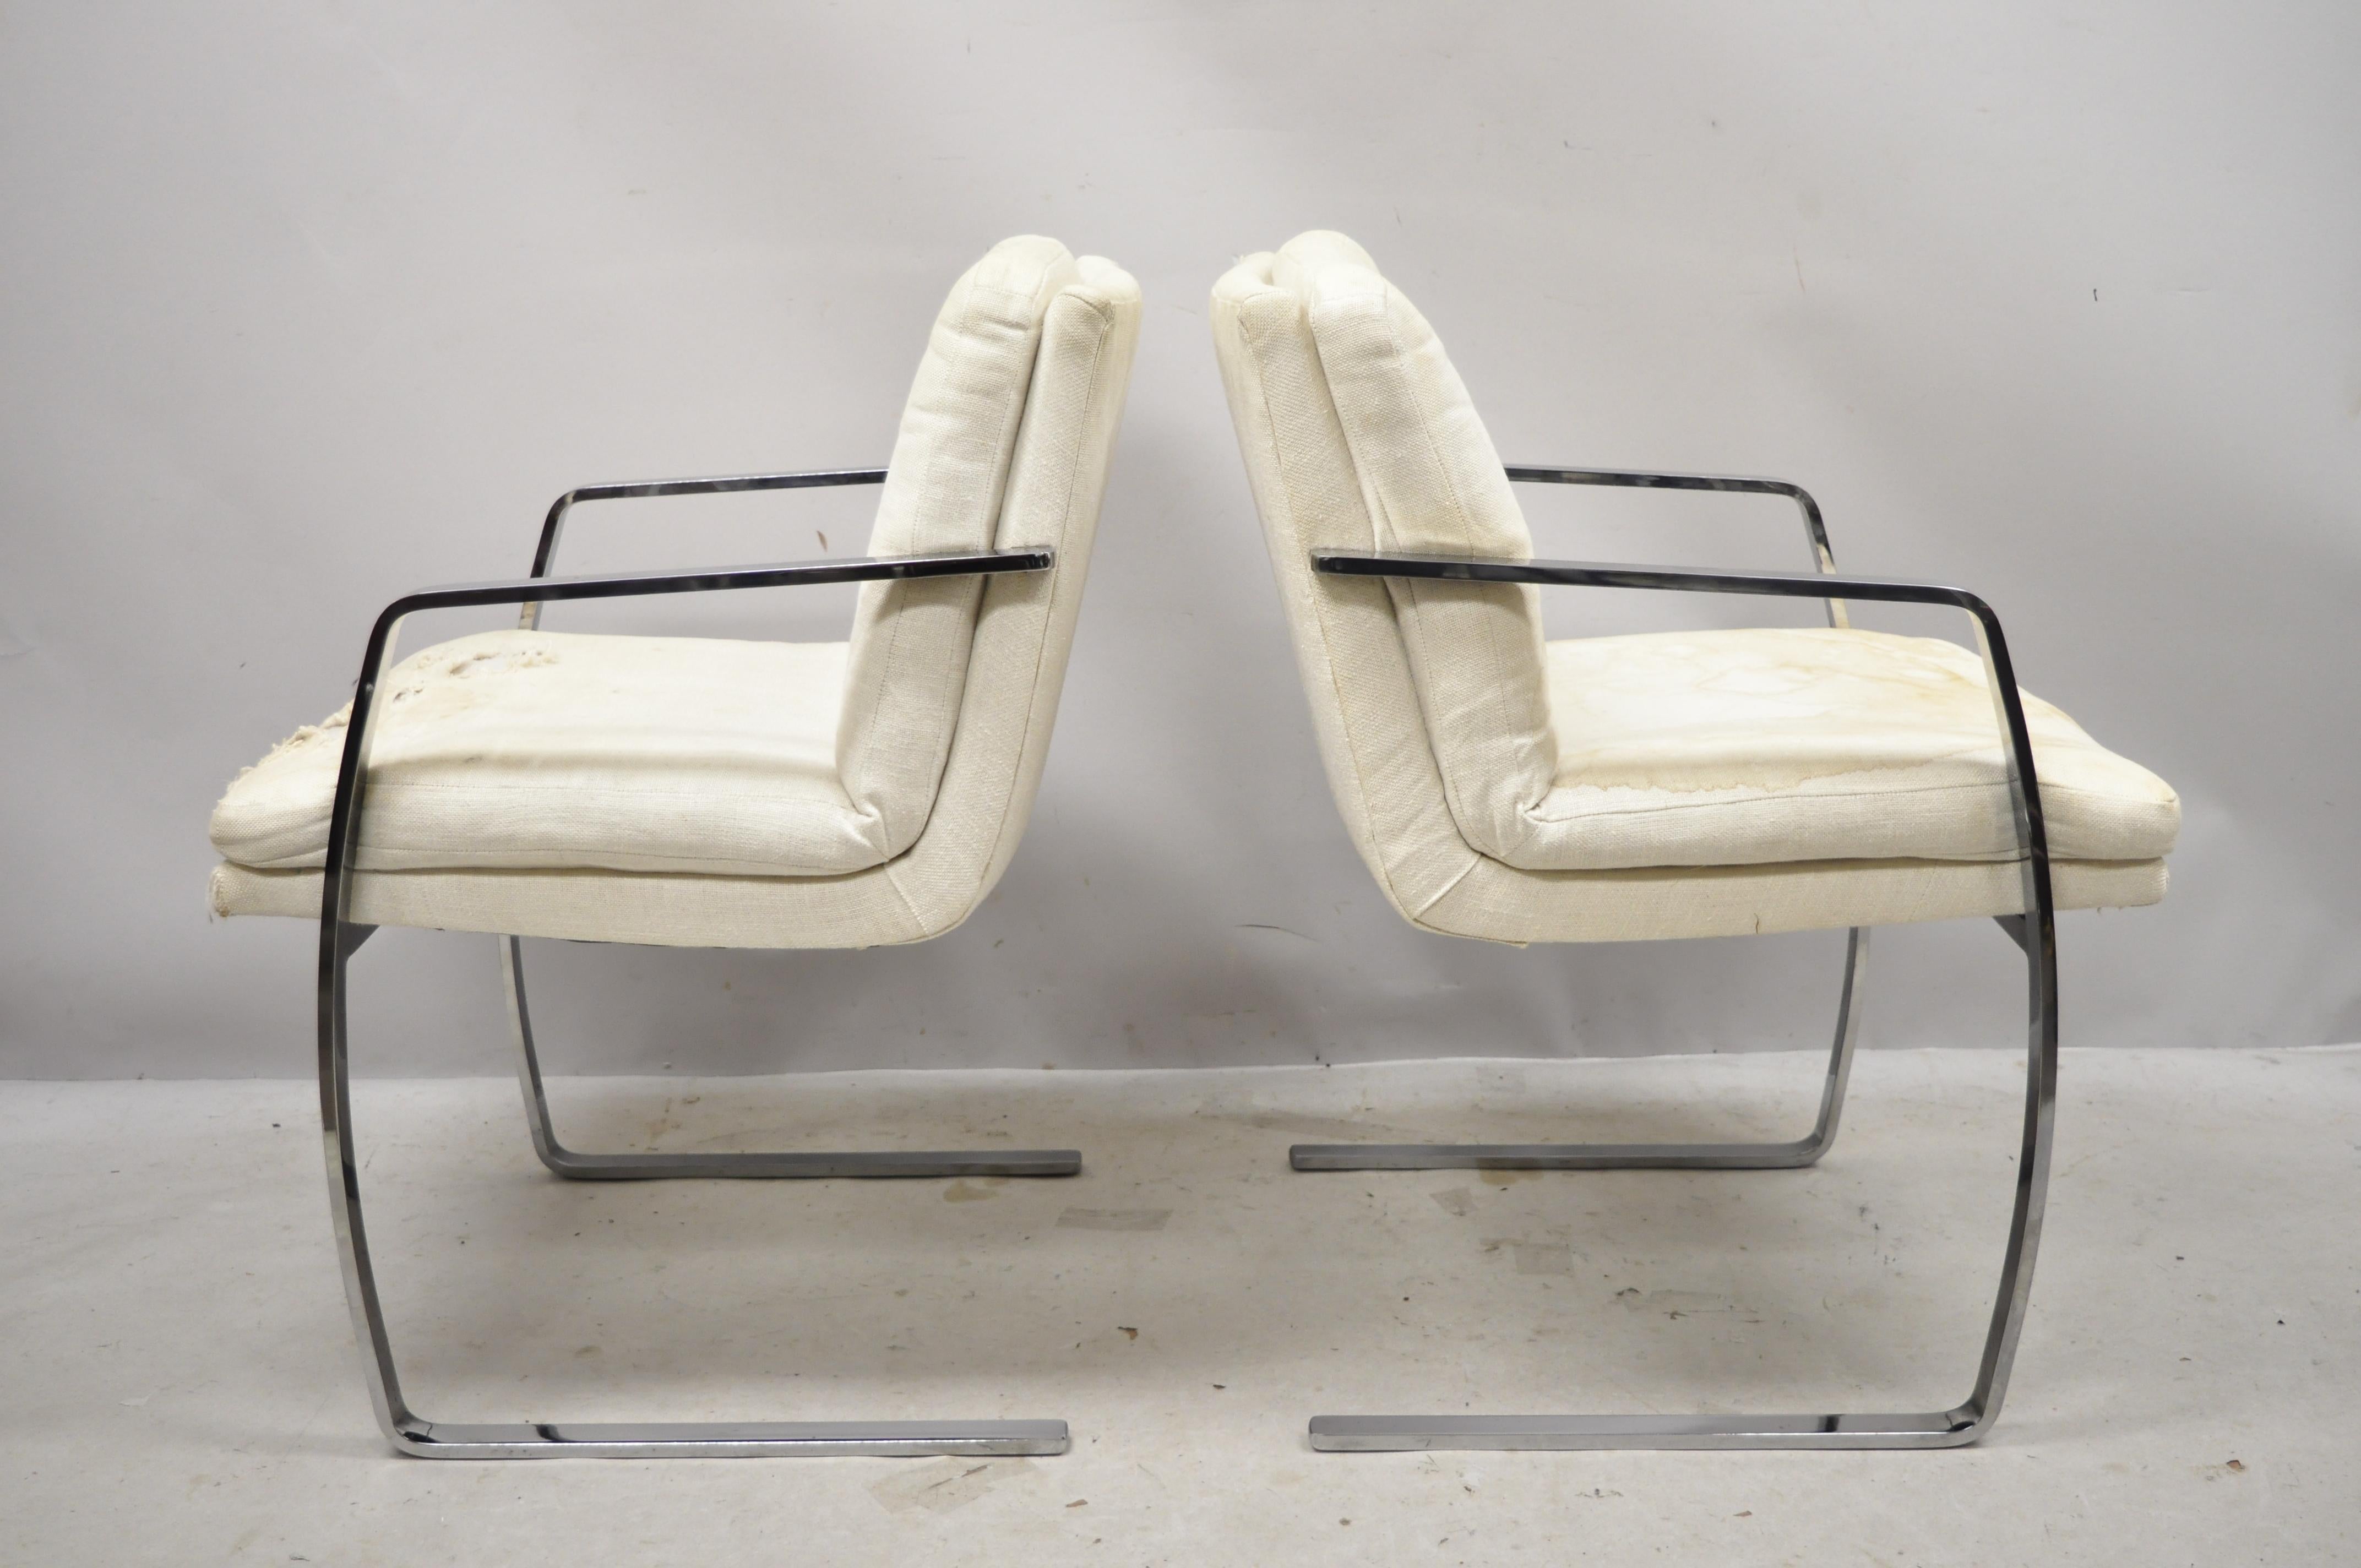 North American Mid-Century Modern BRNO Style Chrome Cantilever Lounge Armchairs 'C', a Pair For Sale